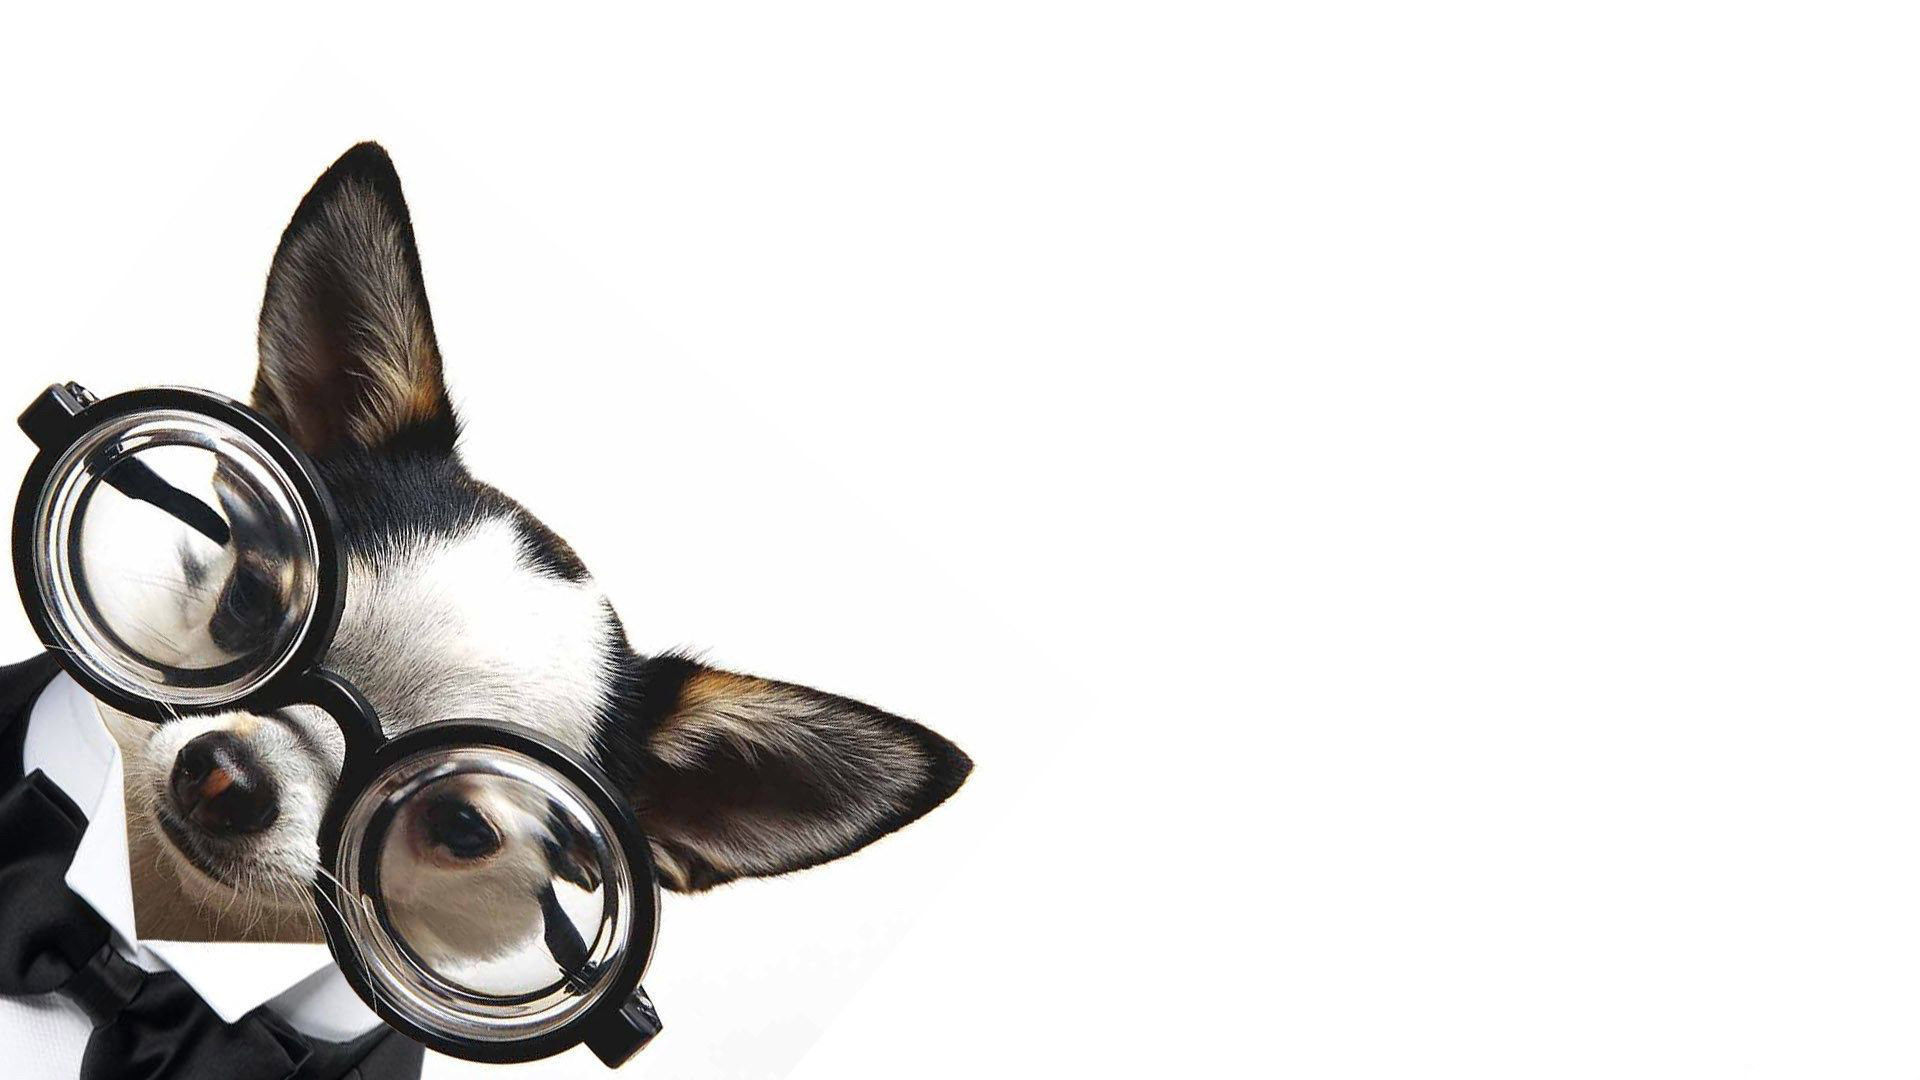 1920x1080 Funny Chihuahua with glasses HD Wallpaper 